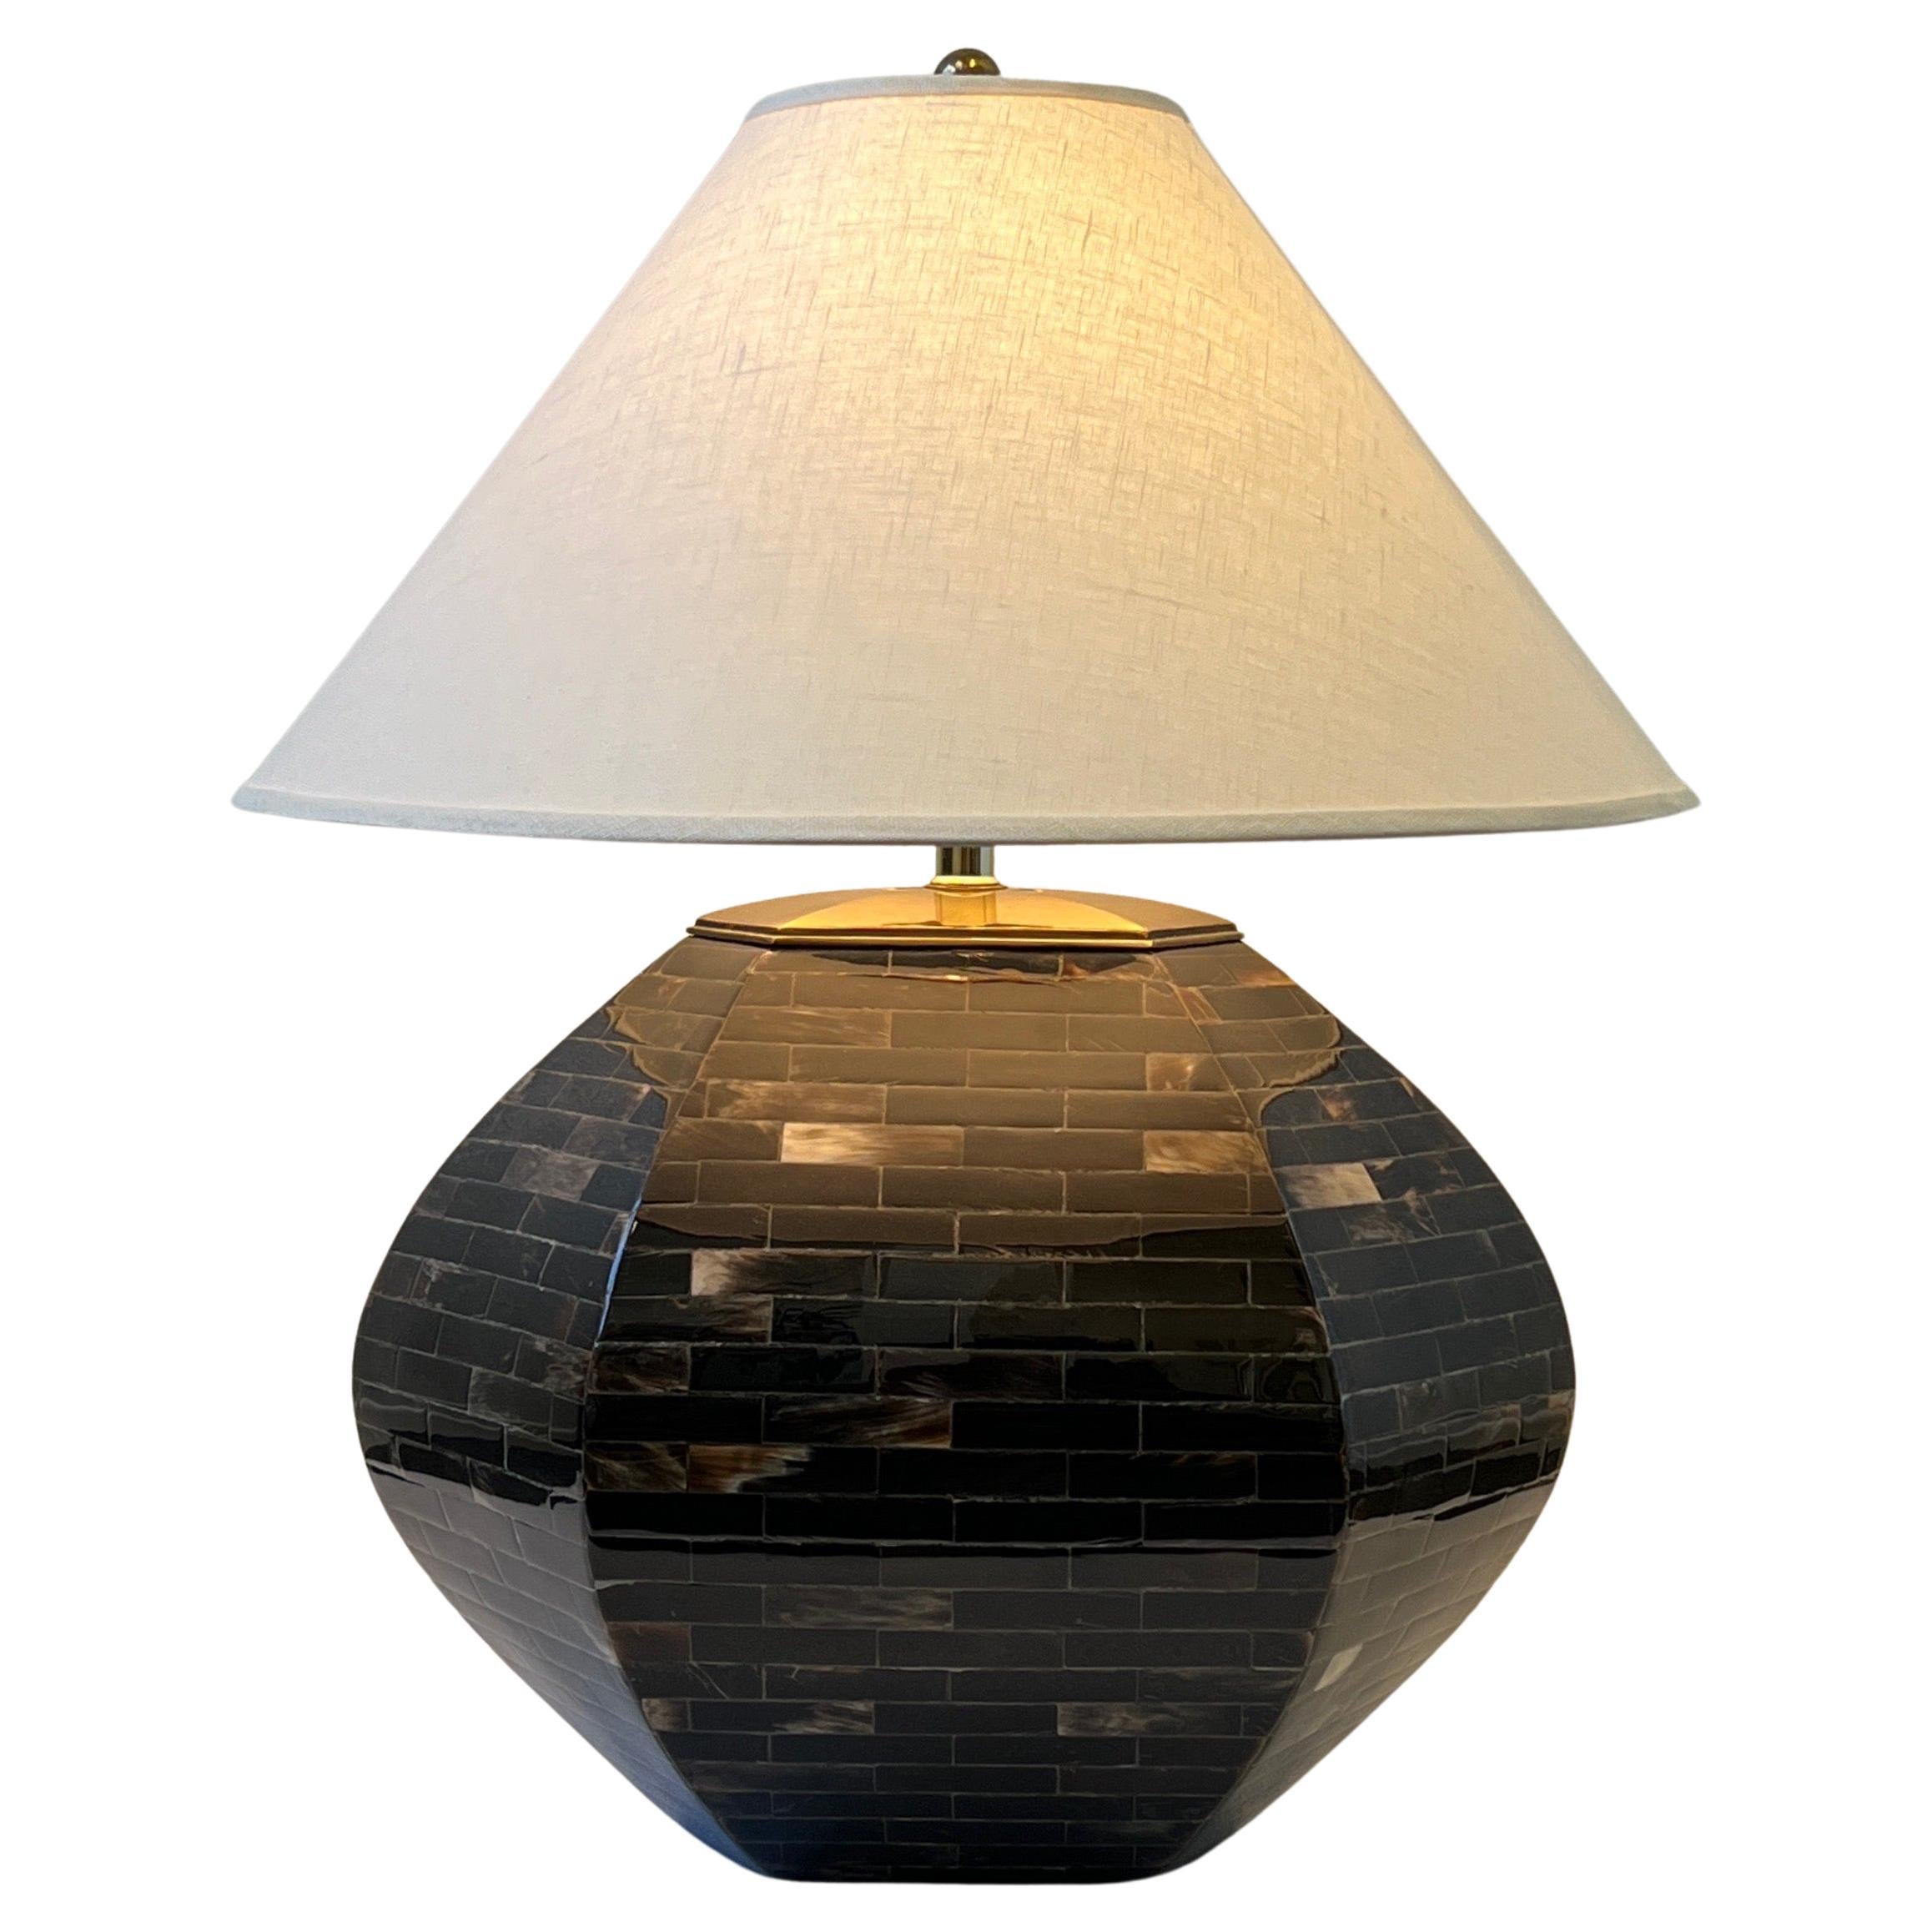 Dark Horn and Brass Oval Hexagonal Shape Table Lamp by Enrique Garcel